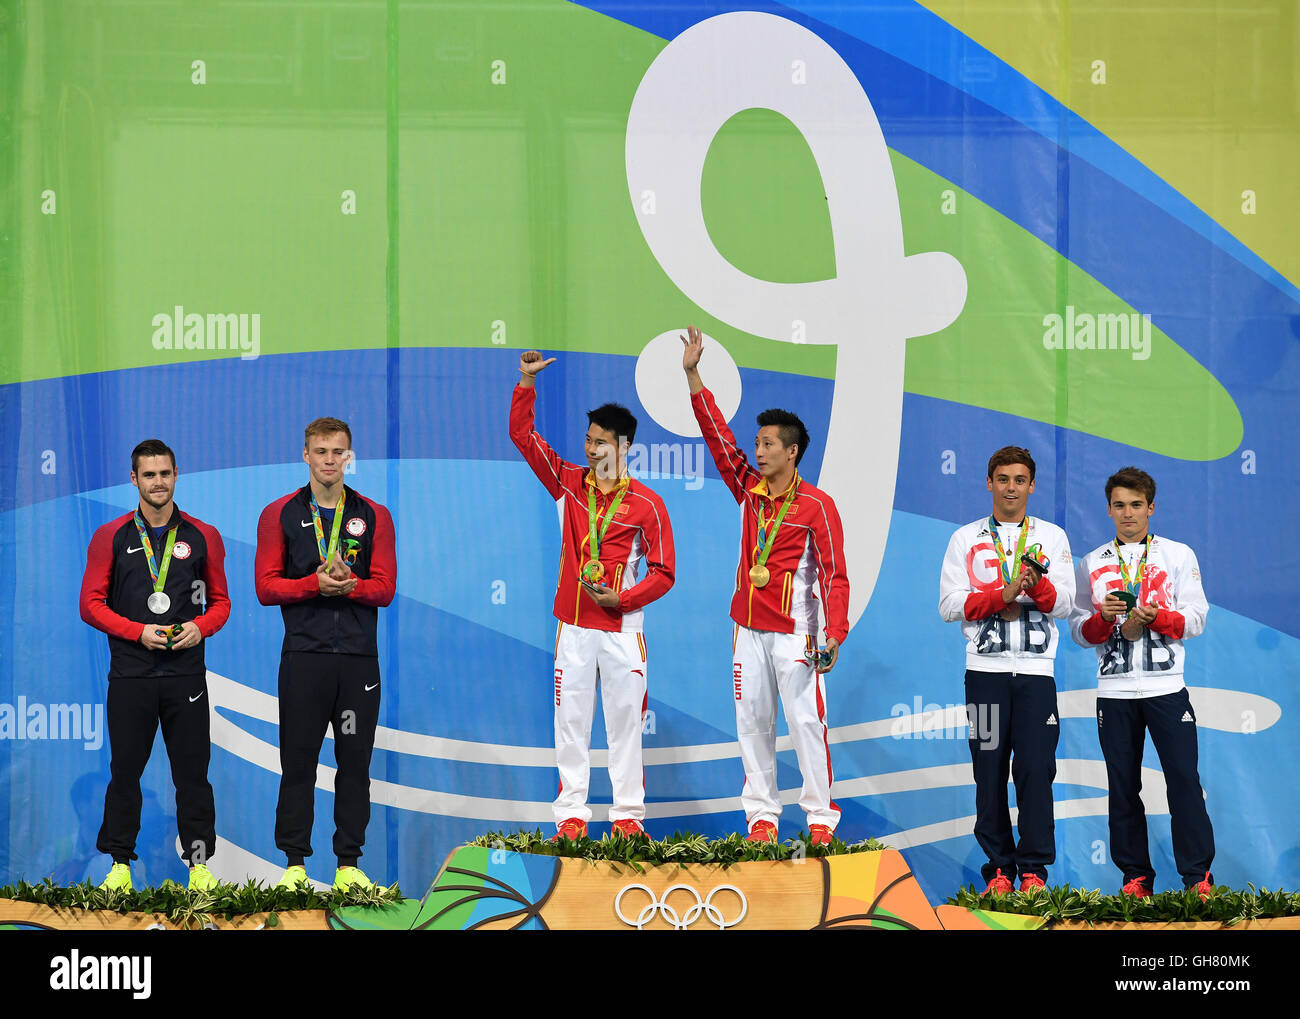 Rio de Janeiro, Brazil. 08th Aug, 2016. David Boudia (L-R) and Steele Johnson of the USA, Chen Aisen and Lin Yue of China and Daniel Goodfellow and Thomas Daley of Great Britain pose with their medals on the podium after winning the Men's Synchronised 10m Platform Final Swimming event of the Rio 2016 Olympic Games at the Olympic Aquatics Stadium, Rio de Janeiro, Brazil, 8 August 2016. Credit:  dpa picture alliance/Alamy Live News Stock Photo